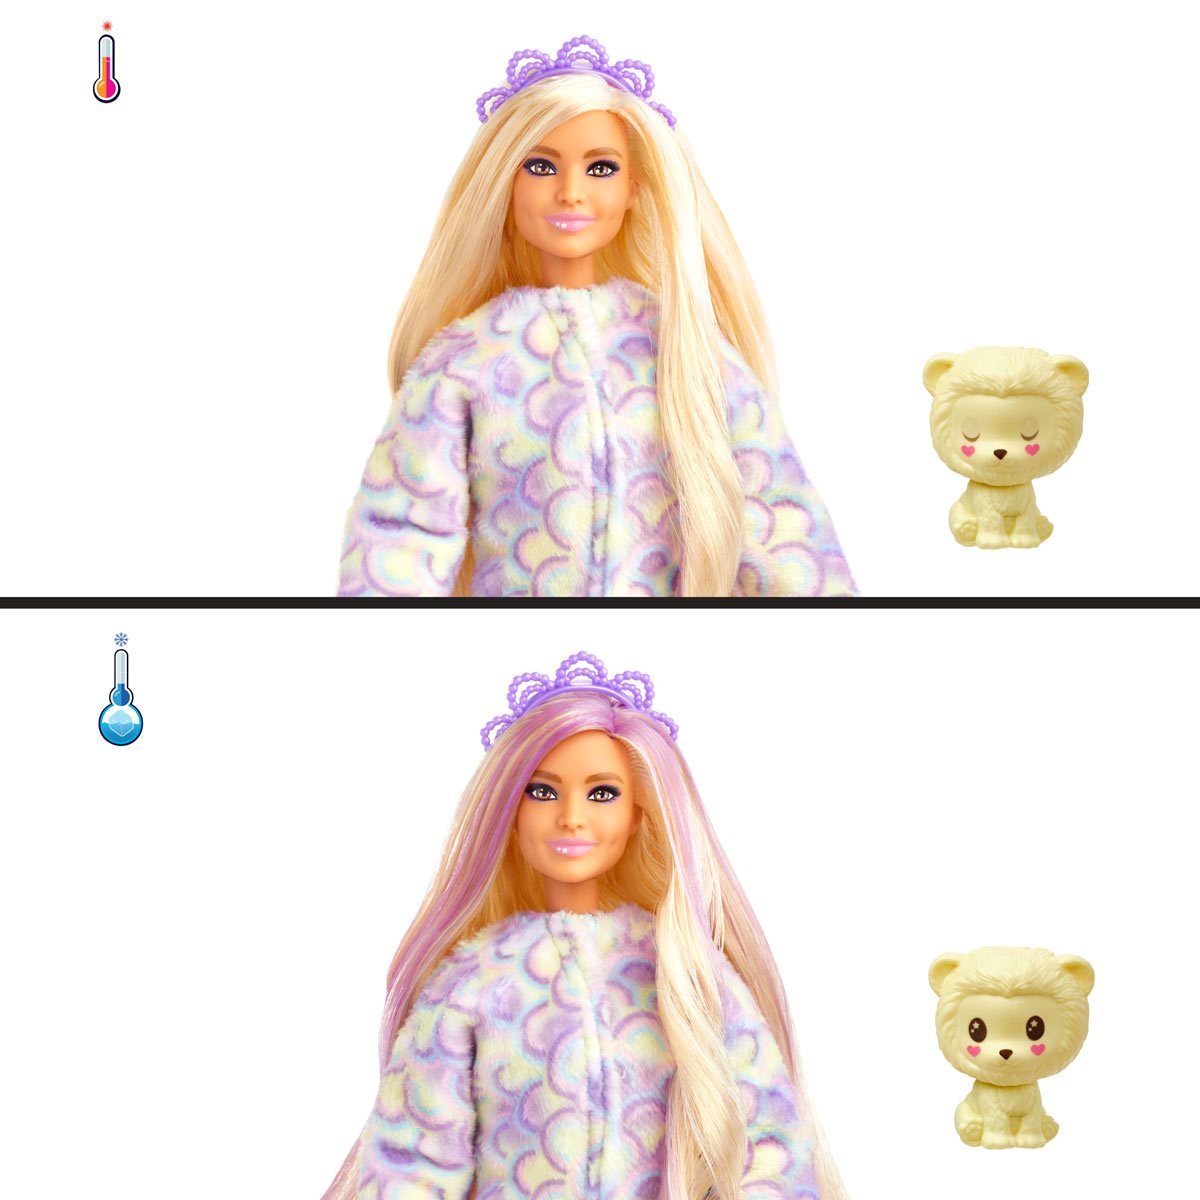 Barbie Cutie Reveal Doll (2 stores) see prices now »